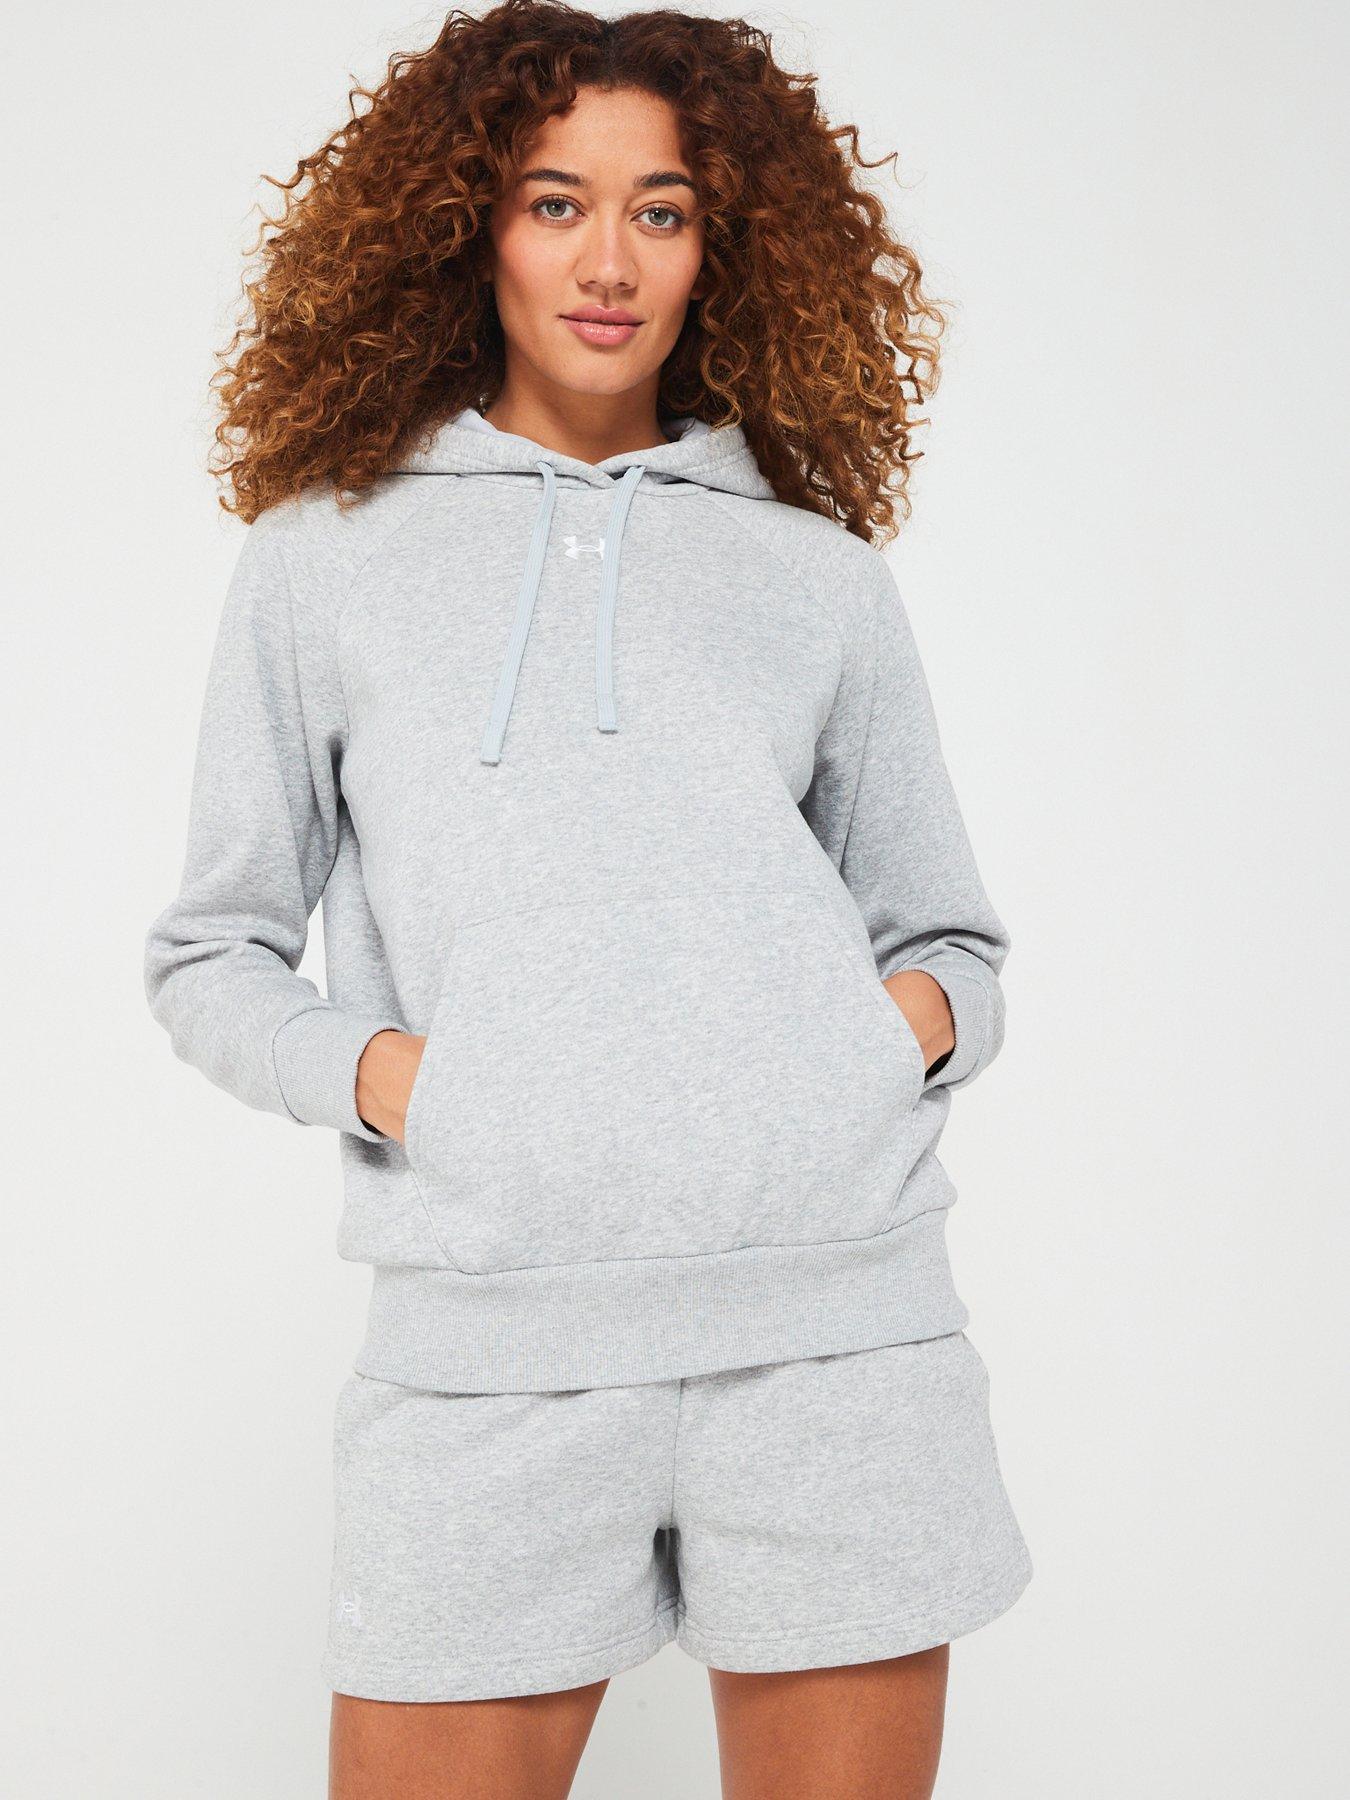 UNDER ARMOUR Womens Rival Fleece Hoodie - Grey/White